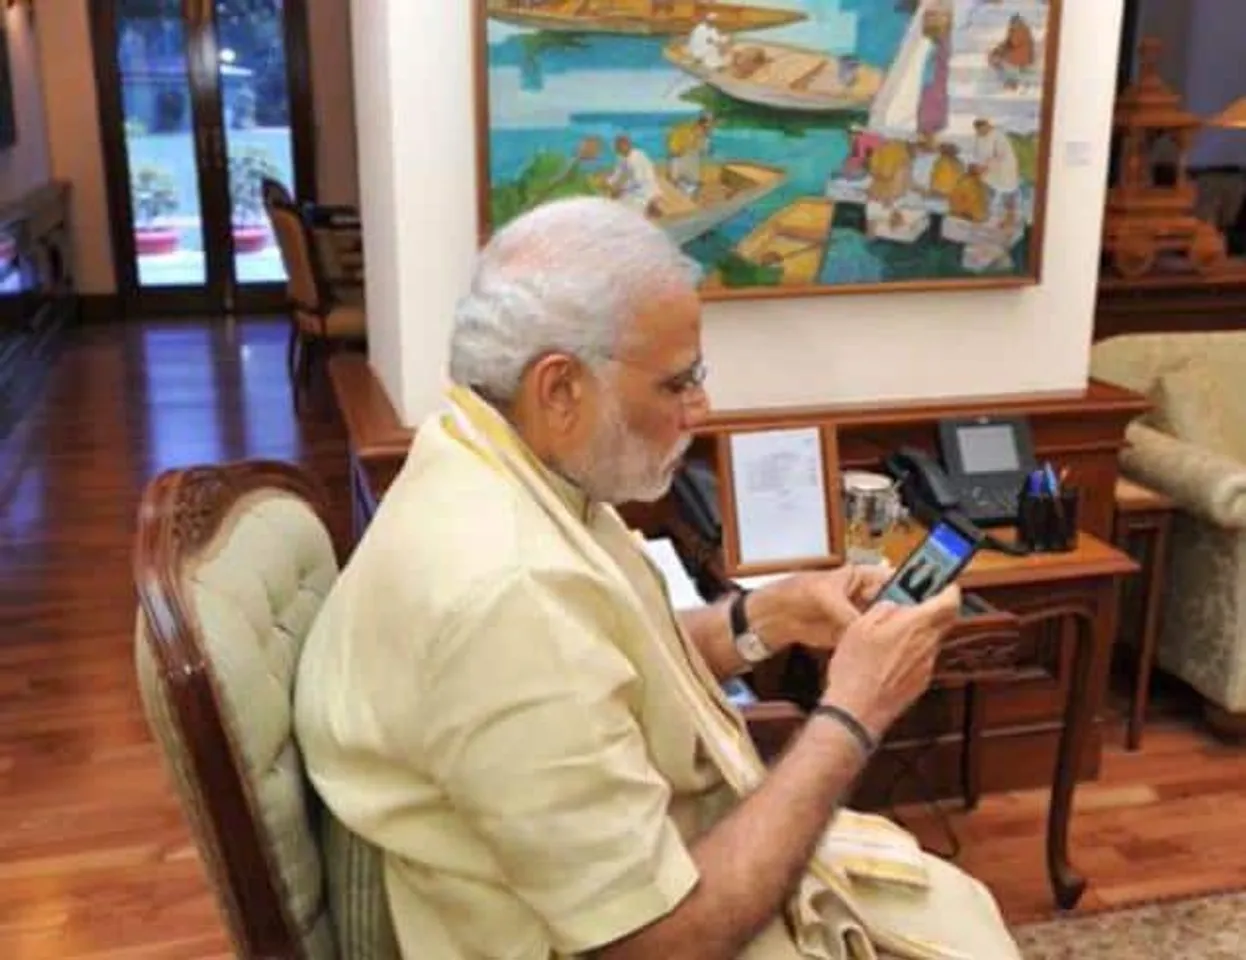 Now connect directly to PM Modi